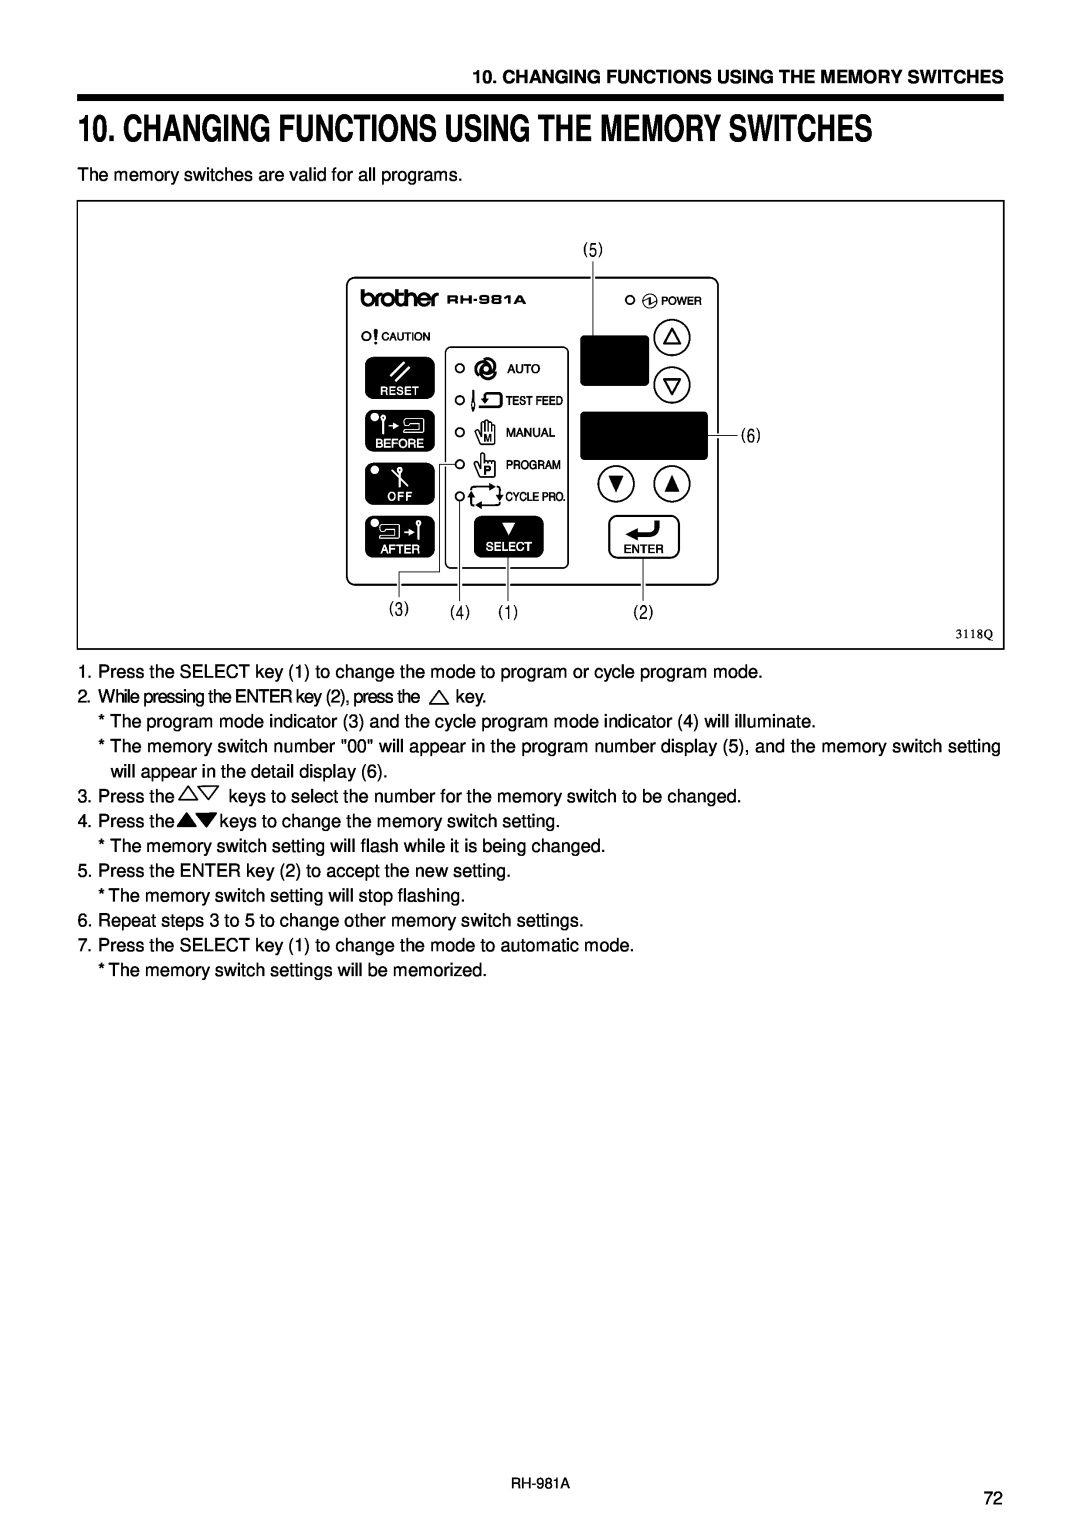 Brother rh-918a manual Changing Functions Using The Memory Switches 